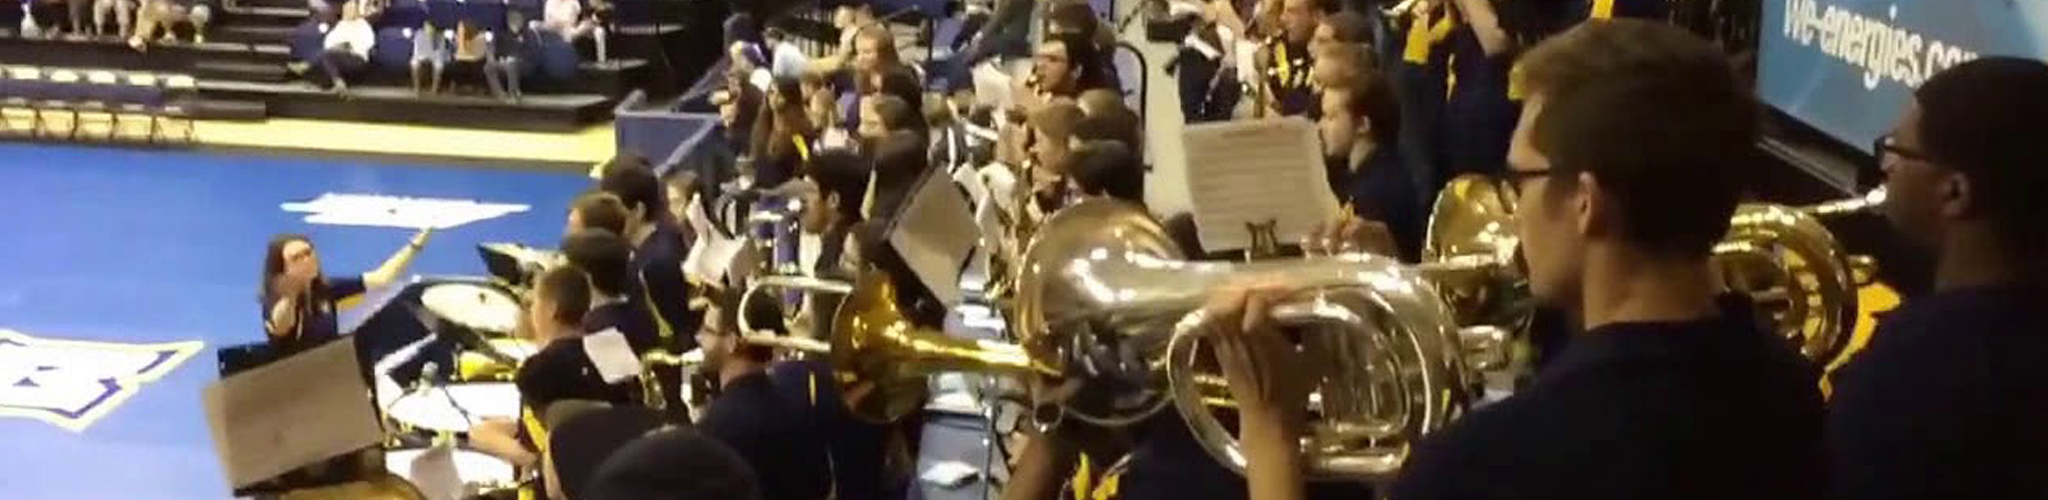 Marquette University Pep Band Performing